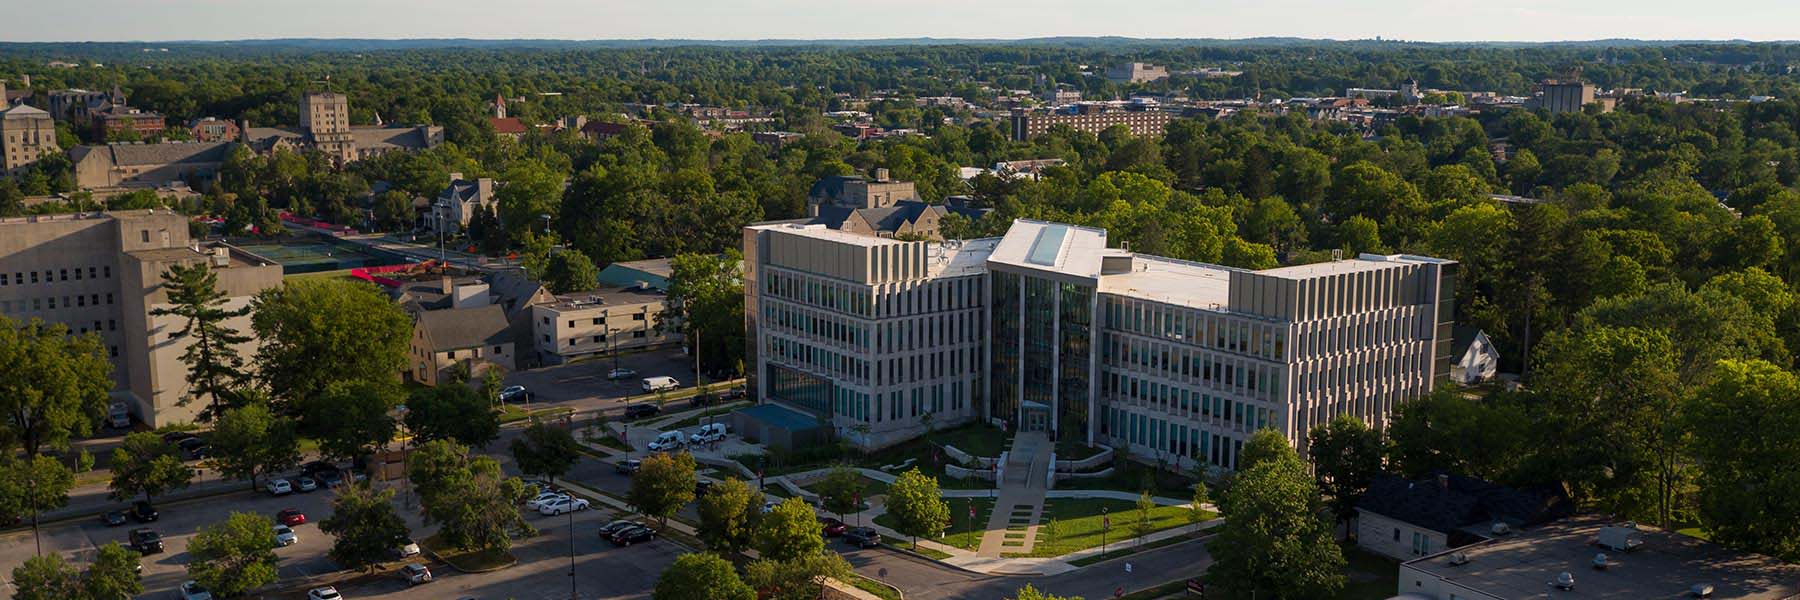 An aerial view of Luddy Hall, an academic building on the IU Bloomington Campus